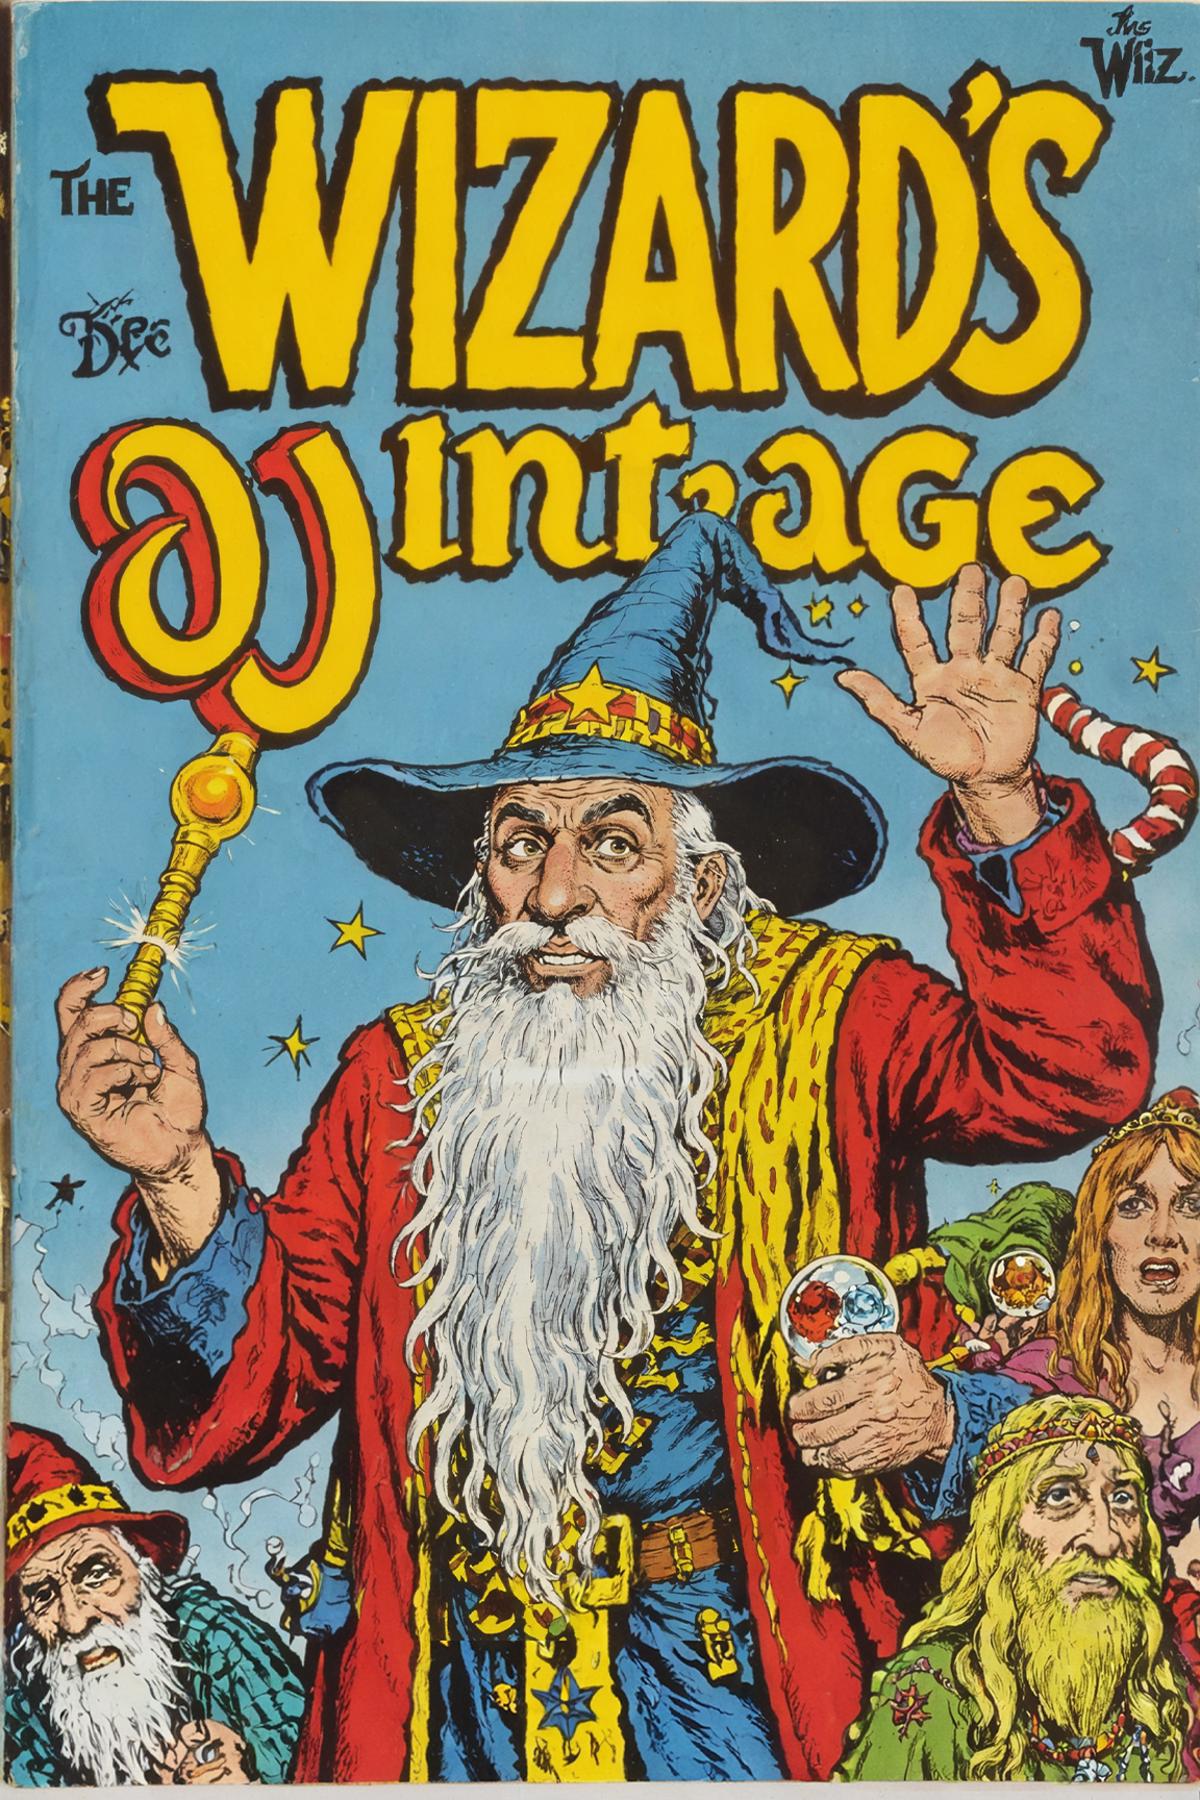 The Wizard's Vintage Comic Book Cover image by WizardWhitebeard